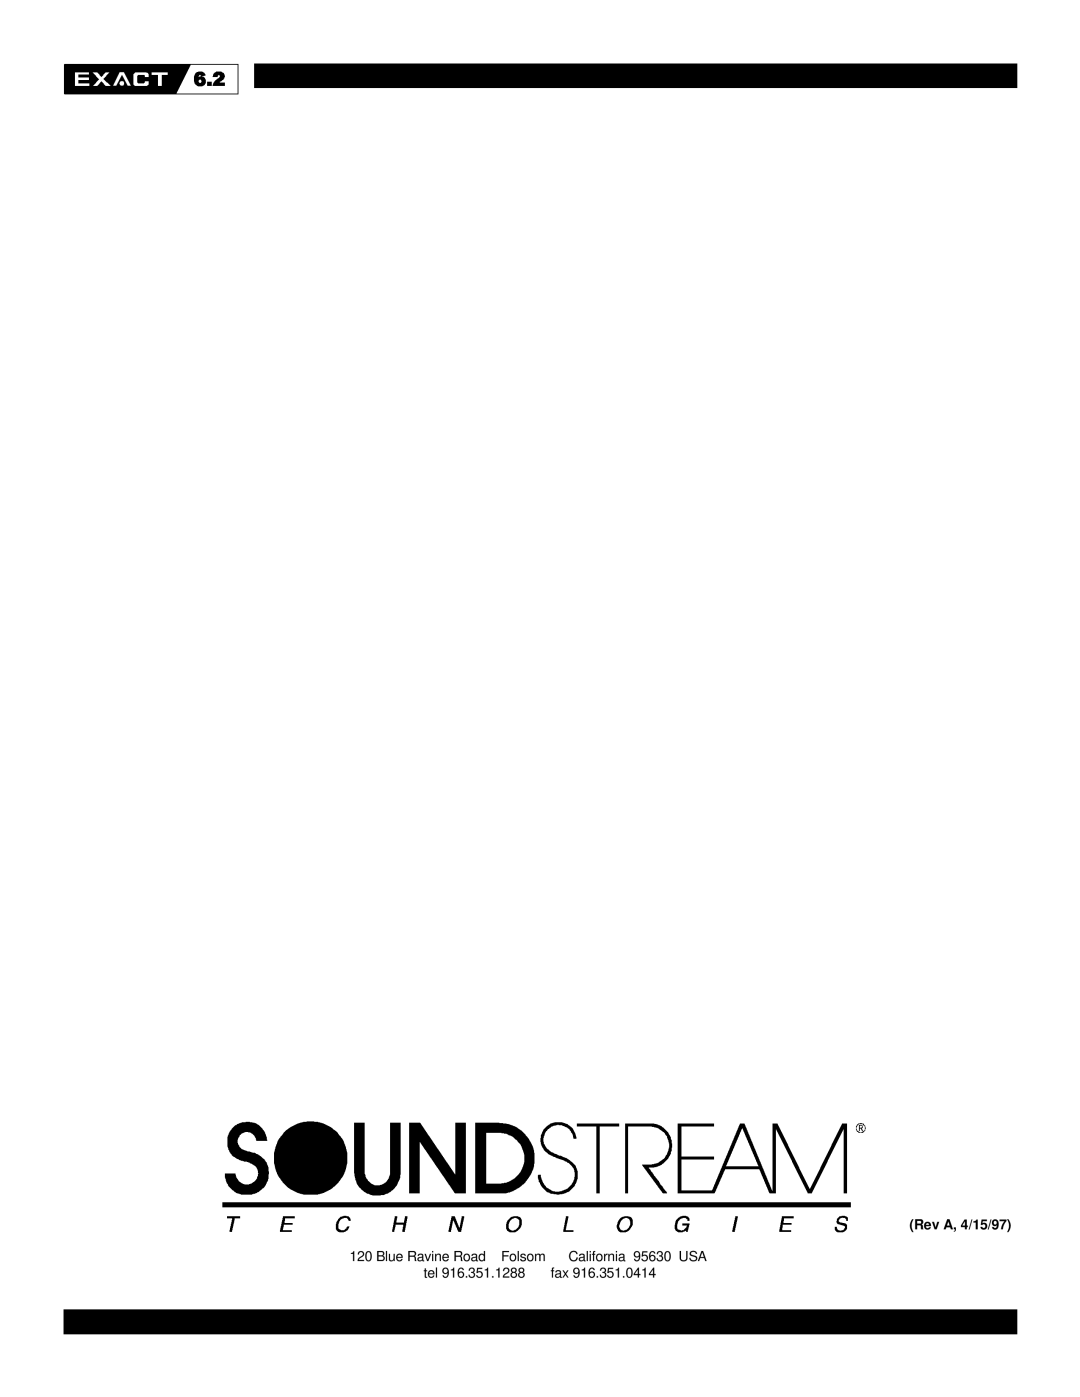 Soundstream Technologies Exact 6.2 owner manual Rev A, 4/15/97 